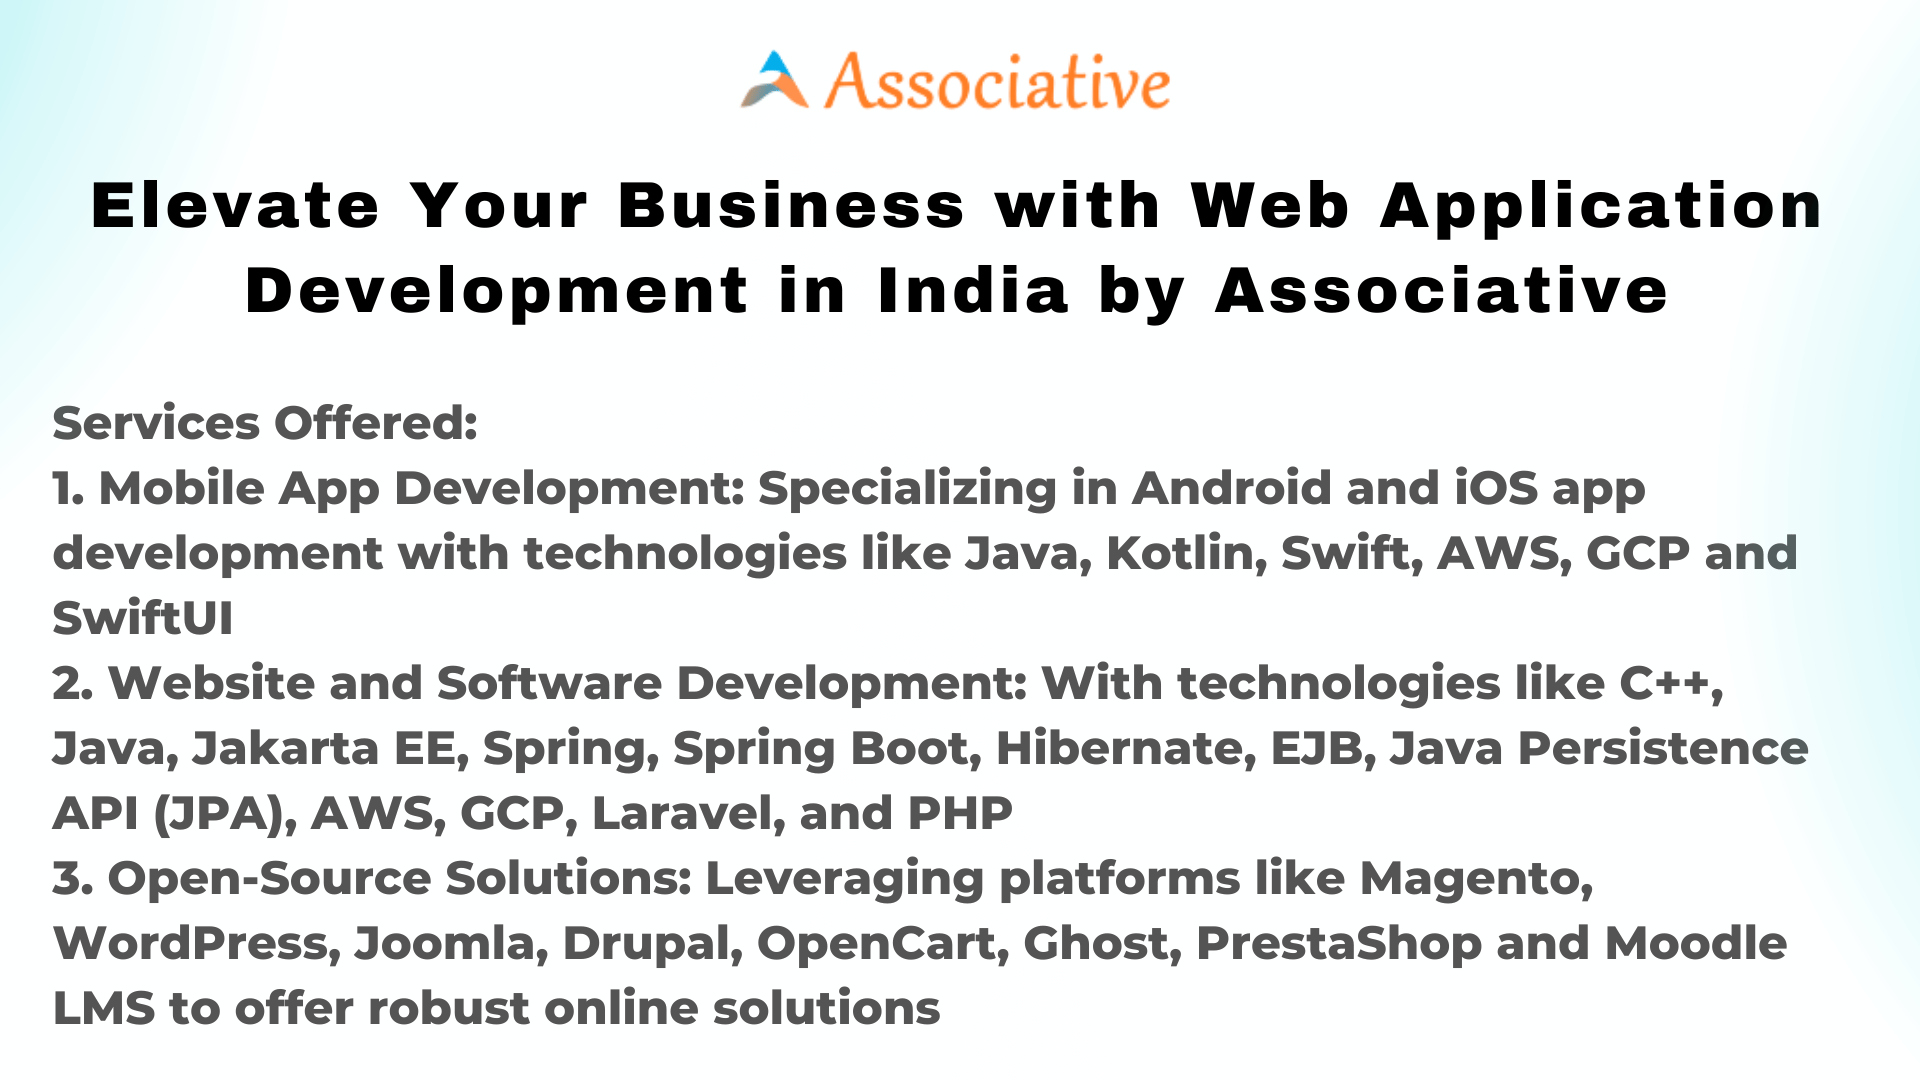 Elevate Your Business with Web Application Development in India by Associative